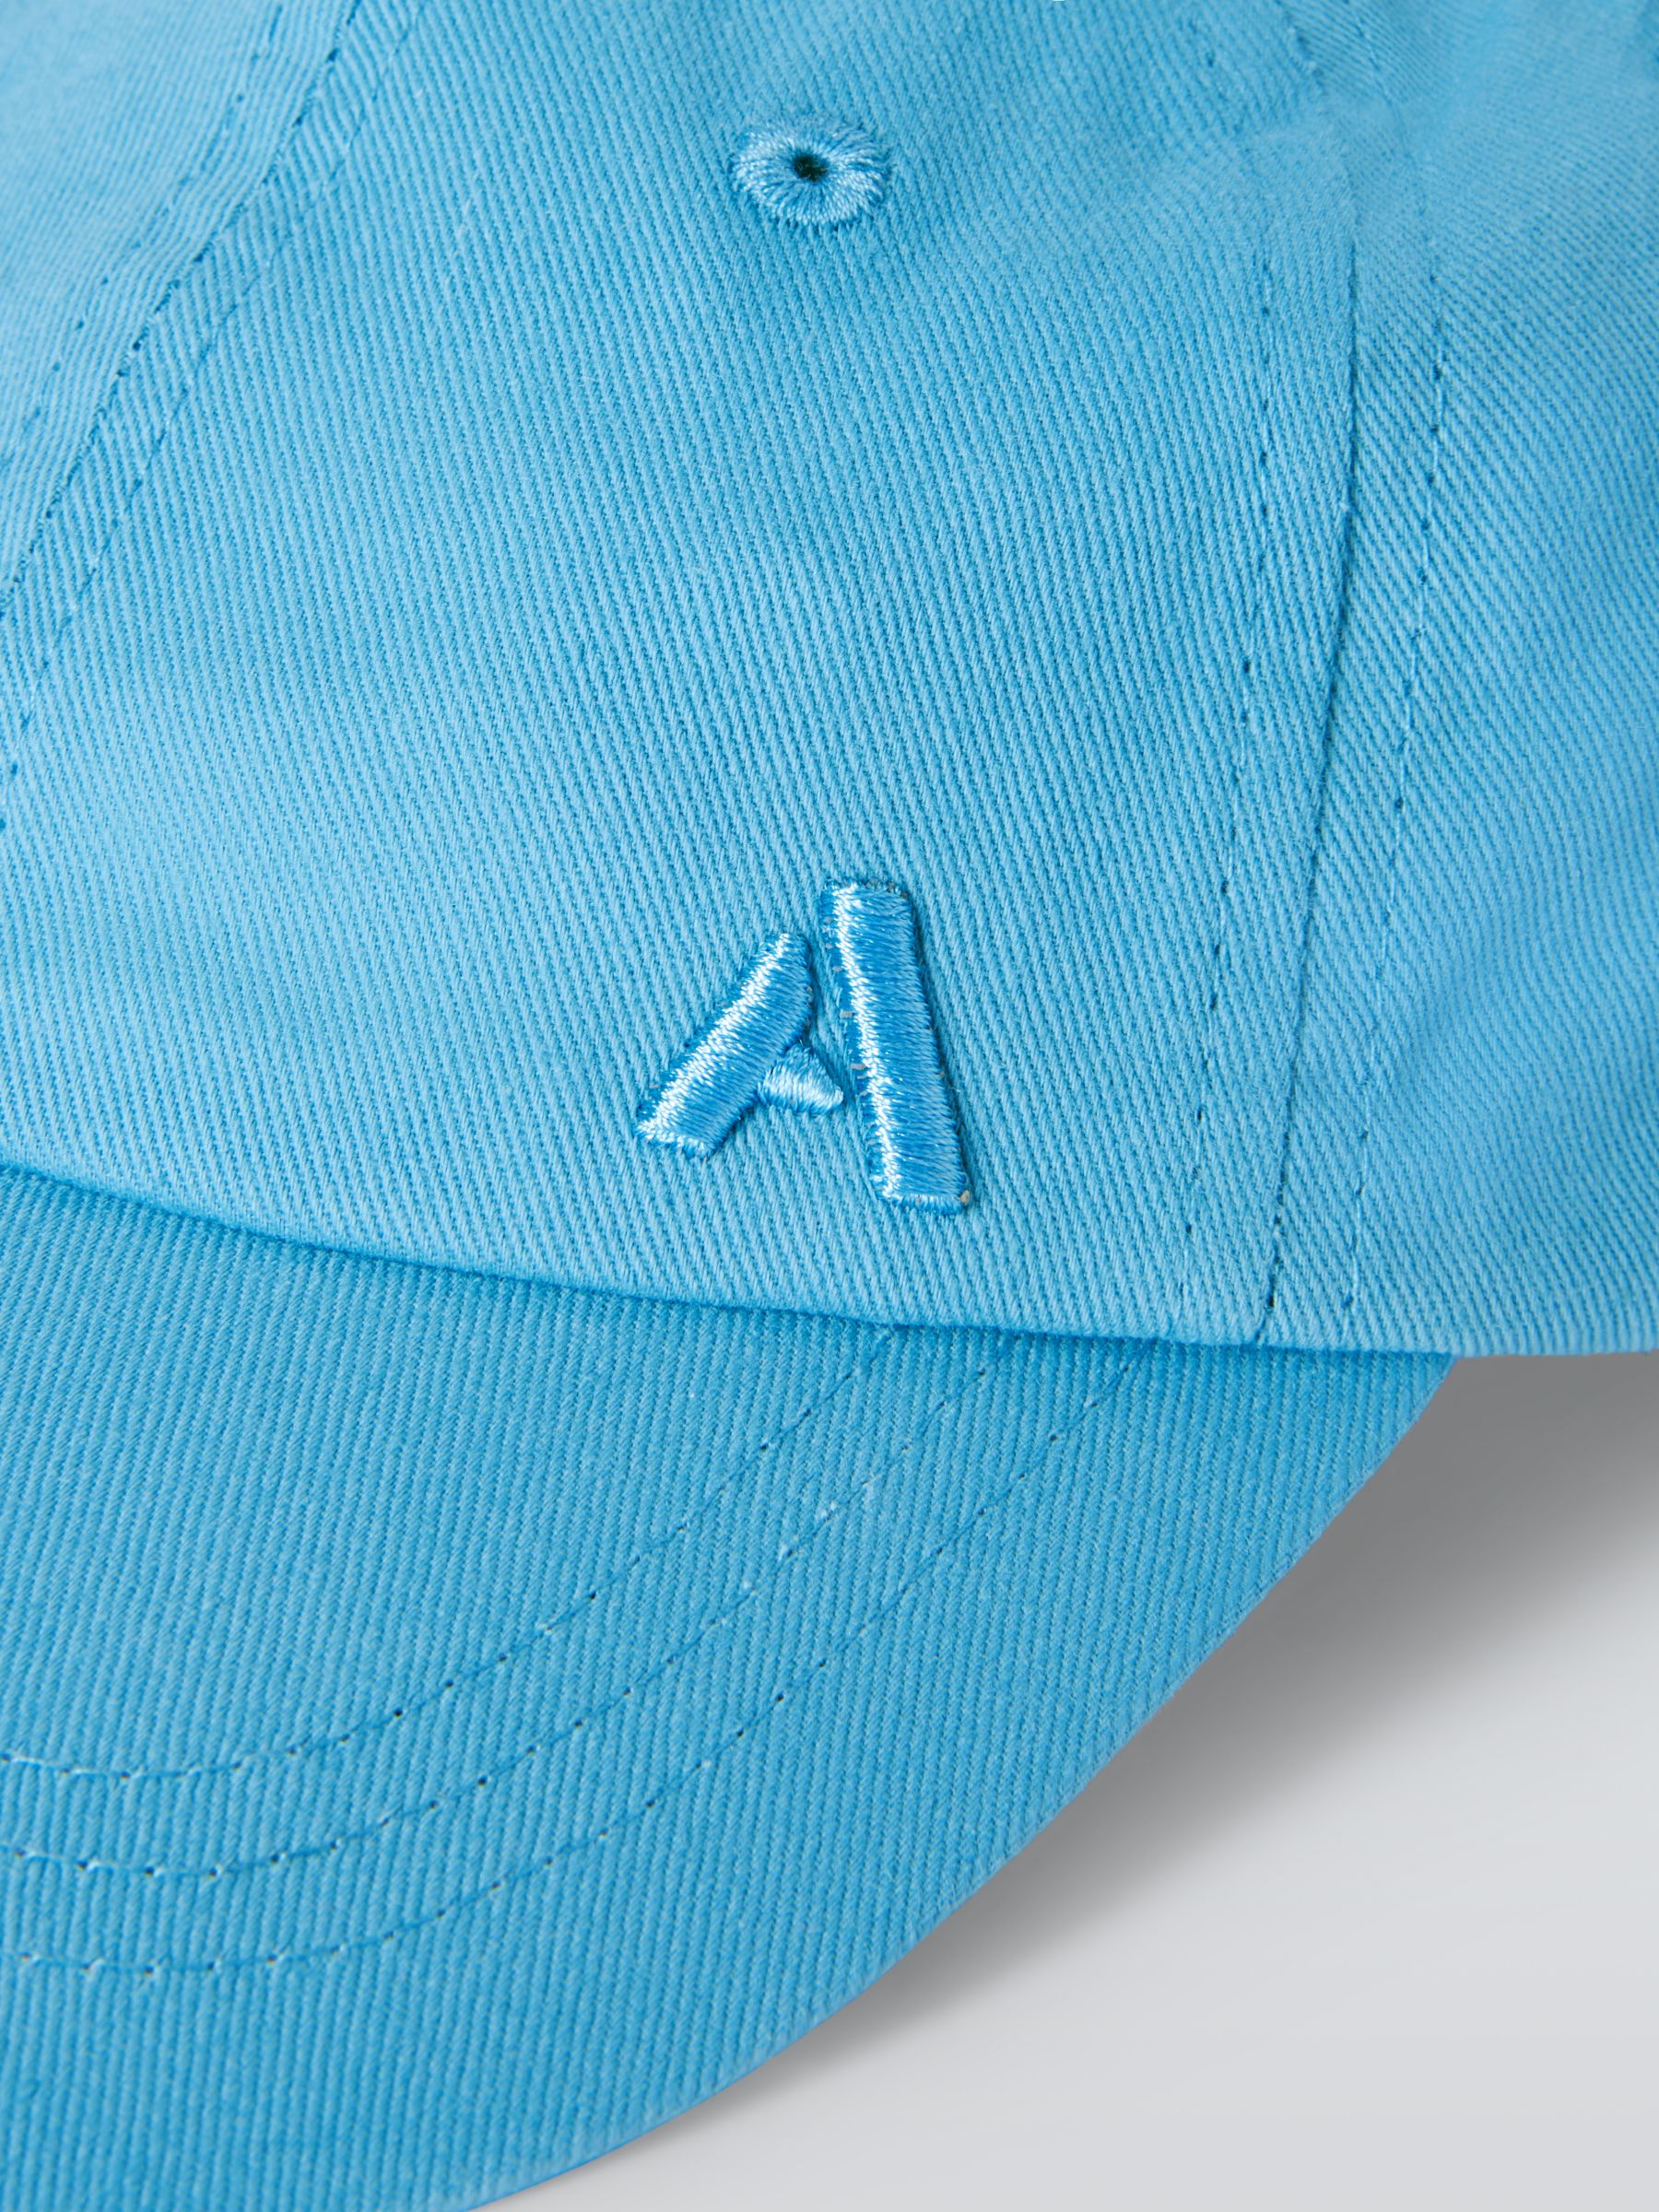 John Lewis ANYDAY Kids' Embroidered Baseball Cap, Blue, 0-6 months